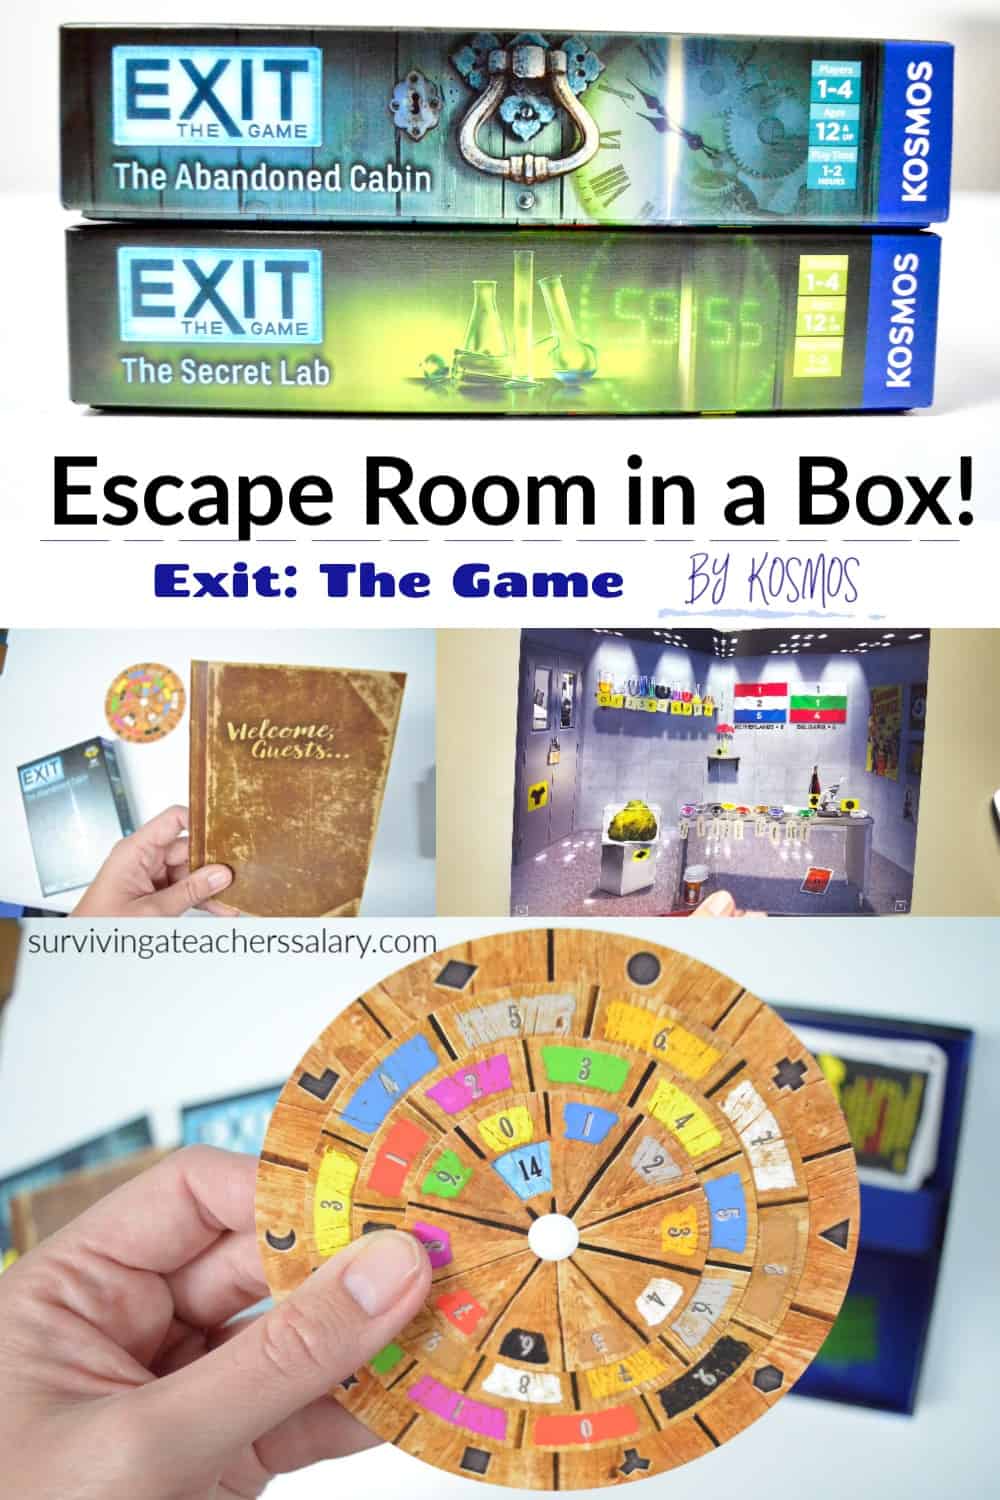 EXIT GAMES - 30 Games To Choose From